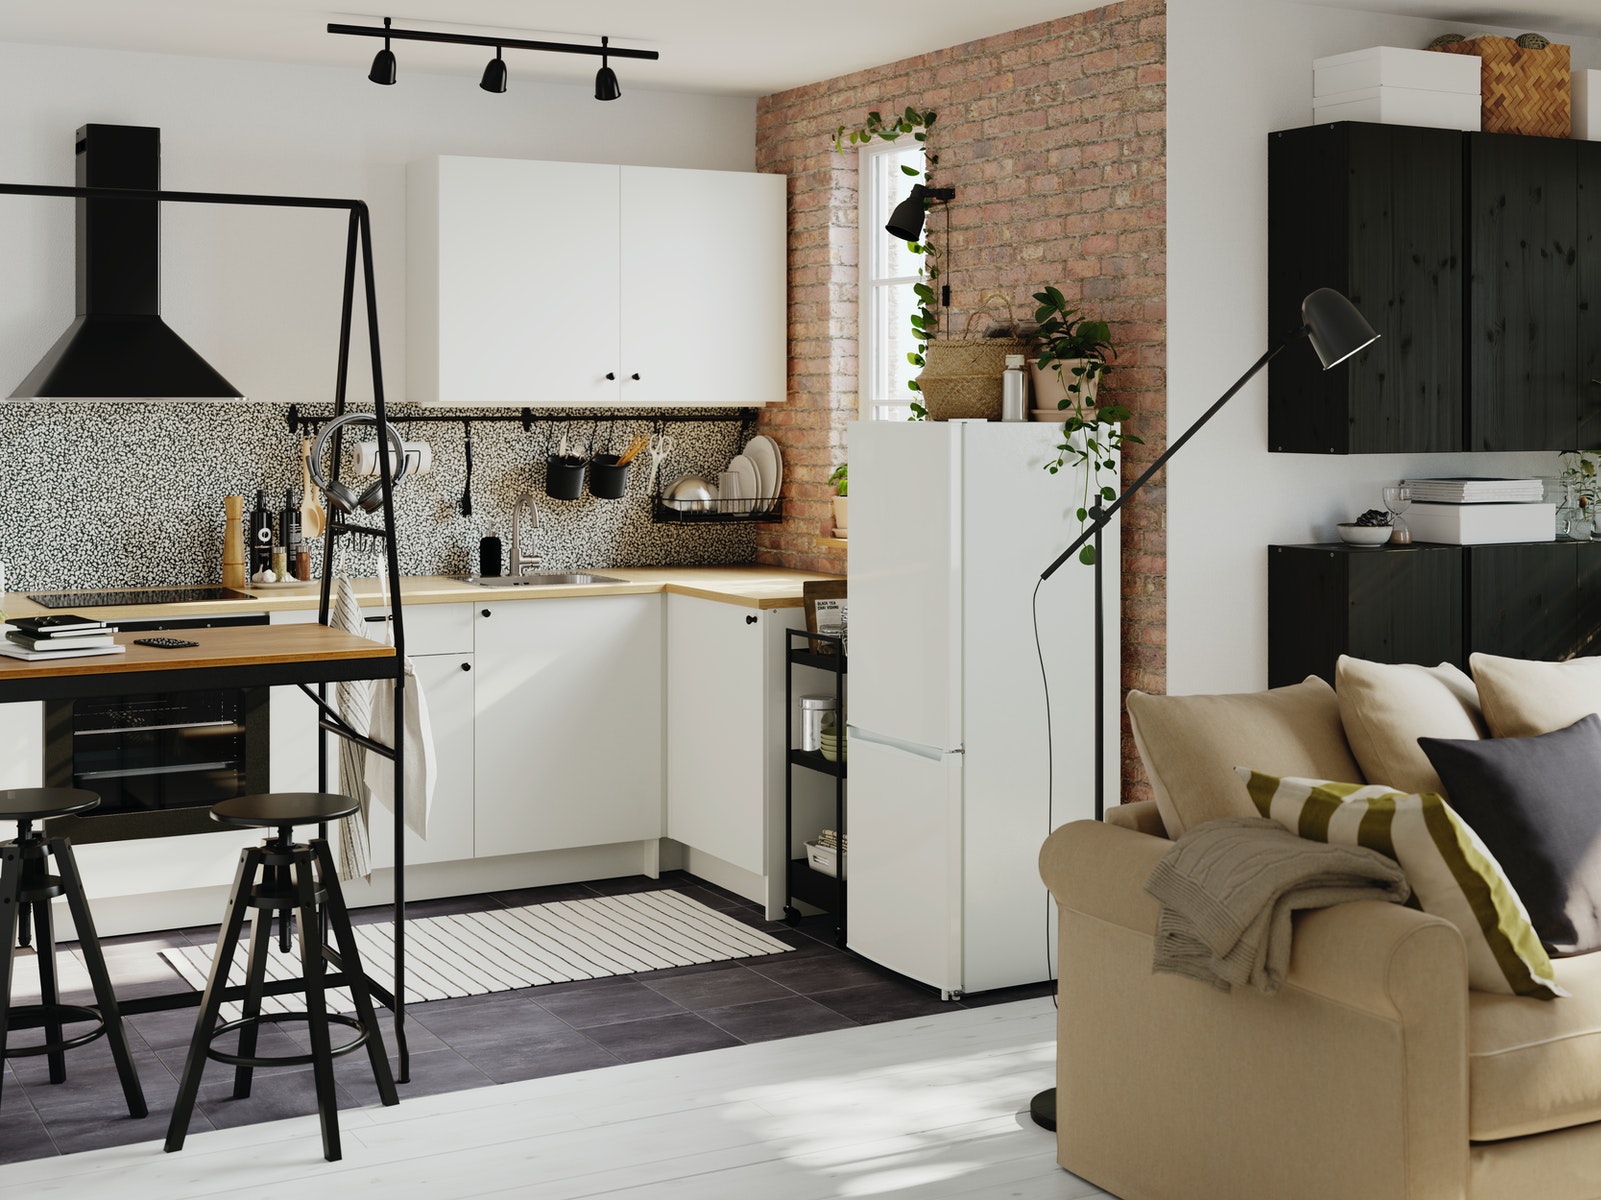 IKEA - Your small kitchen with big possibilities